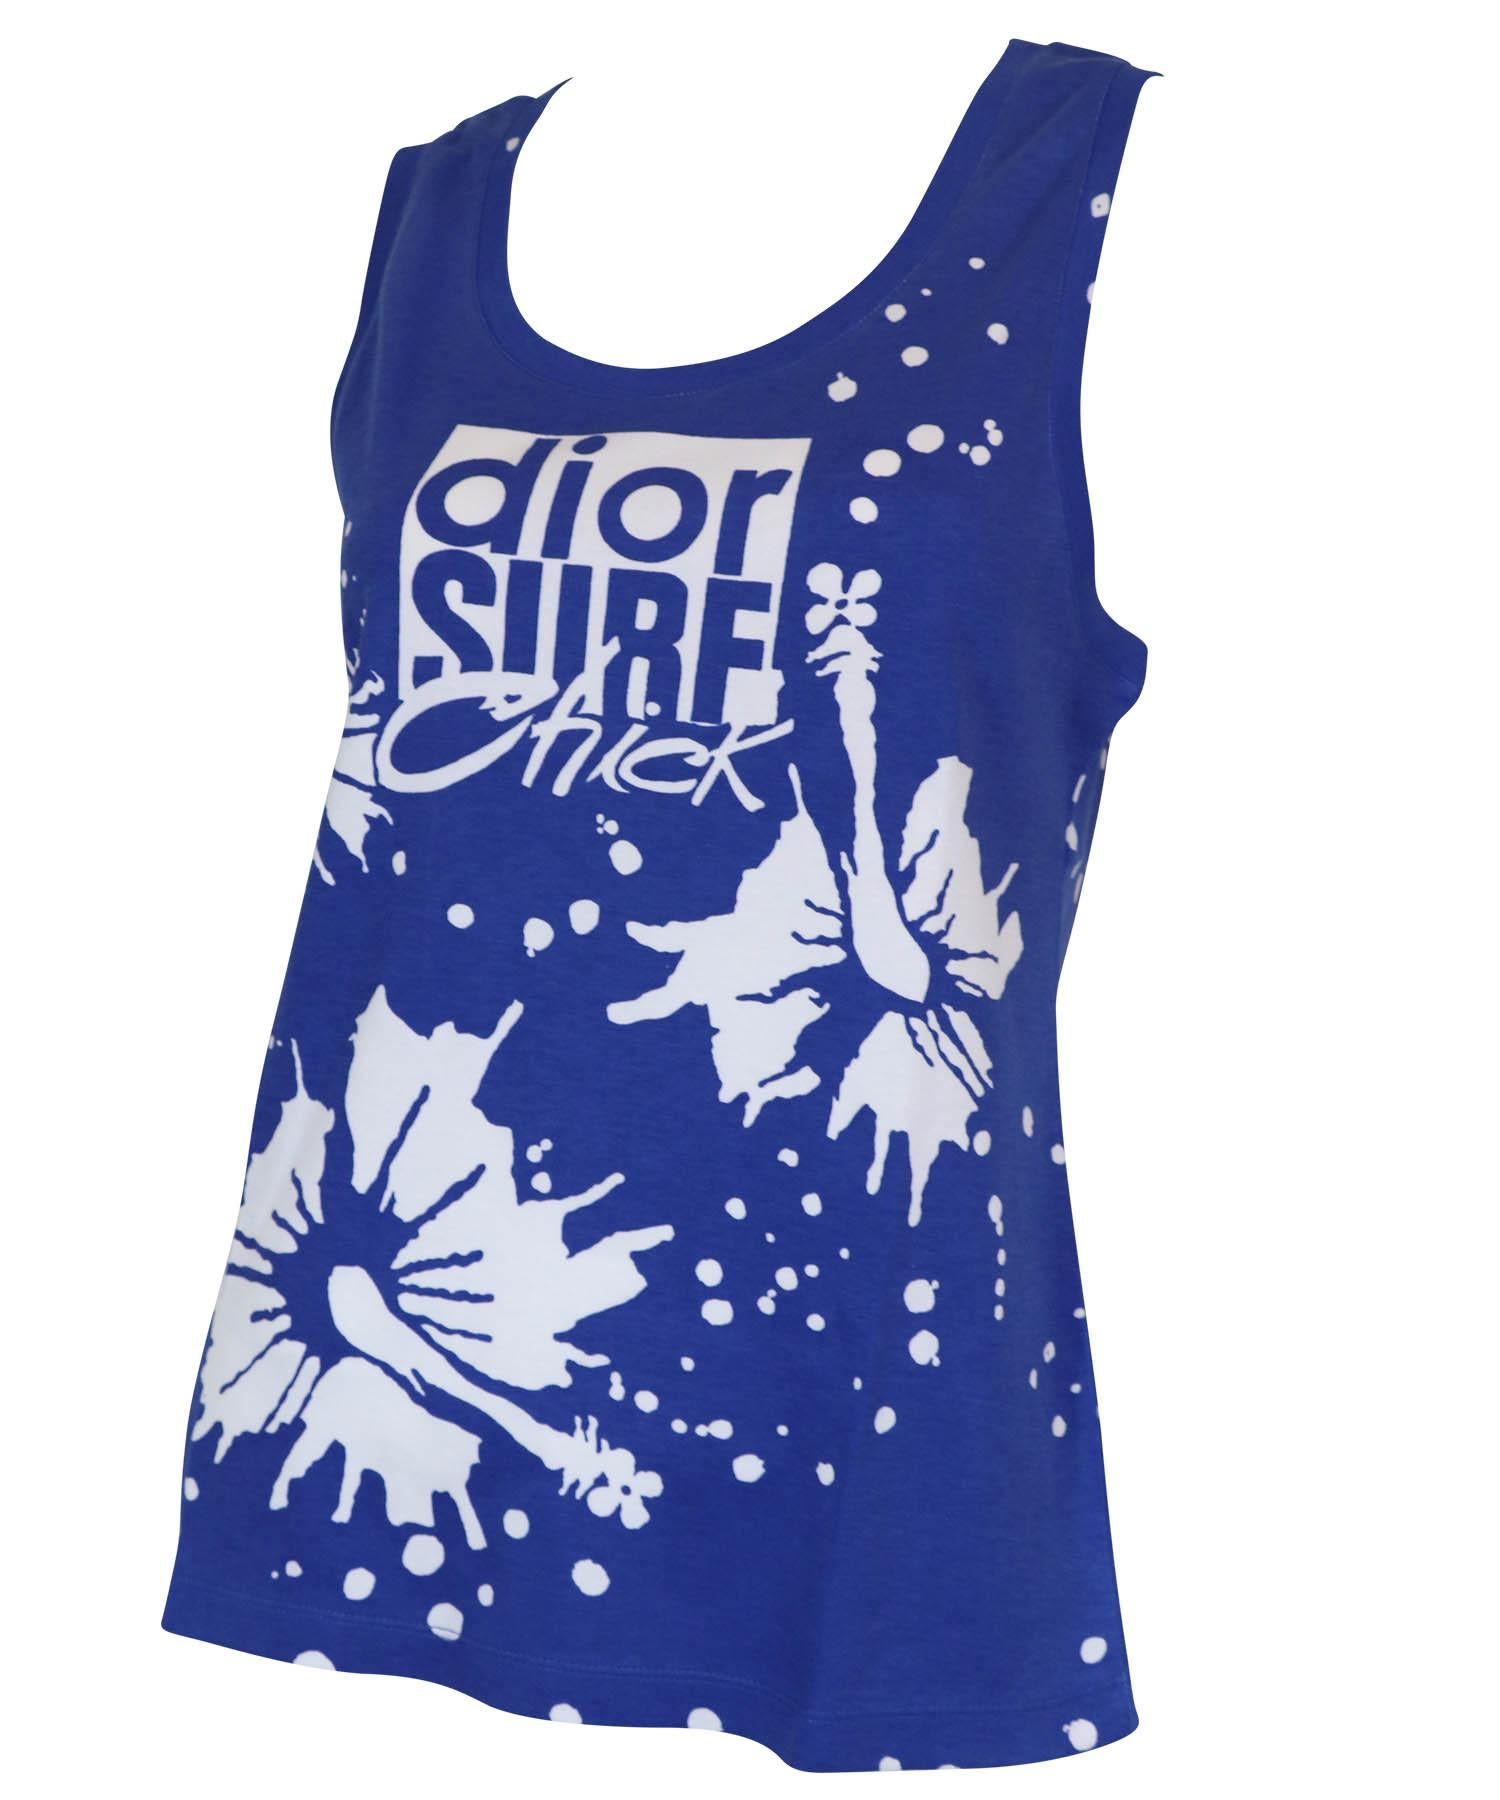 Christian Dior Surf Chick T Shirt from spring 2004 and designed by John Galliano. Blue background with white flowers and 